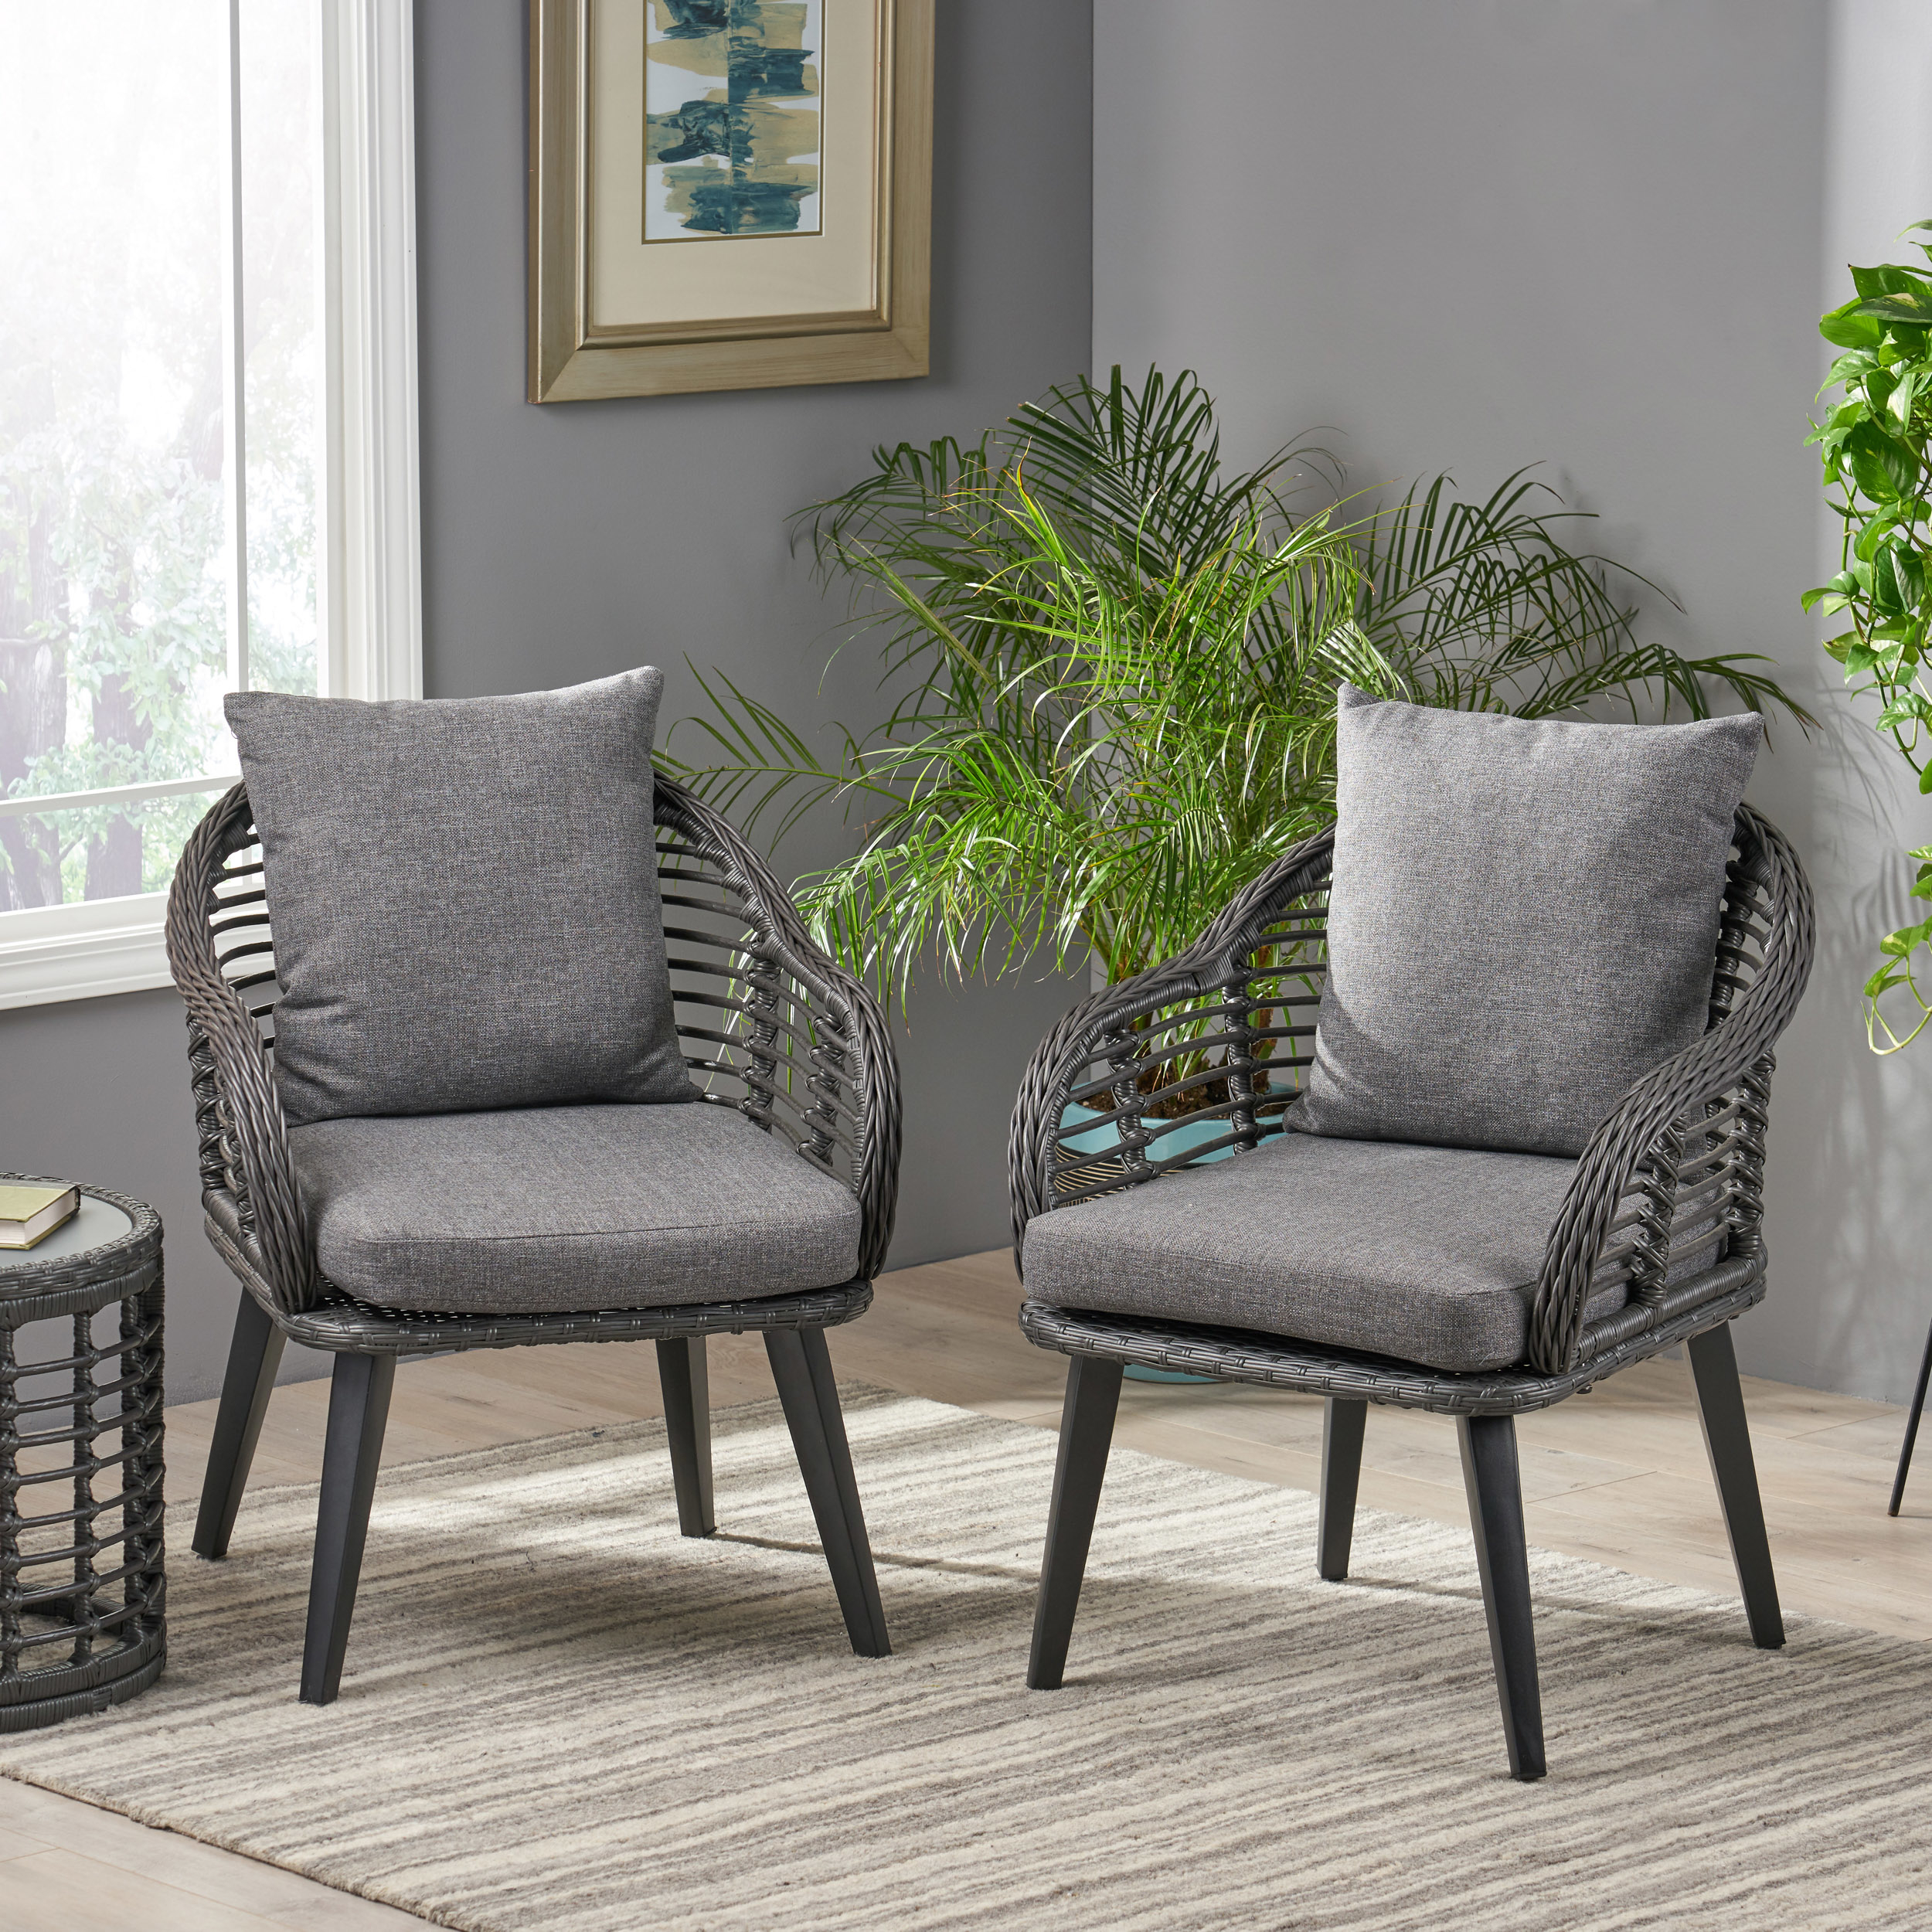 Becky Indoor Wicker Club Chairs With Cushions (Set Of 2) - Gray, Black, Dark Gray